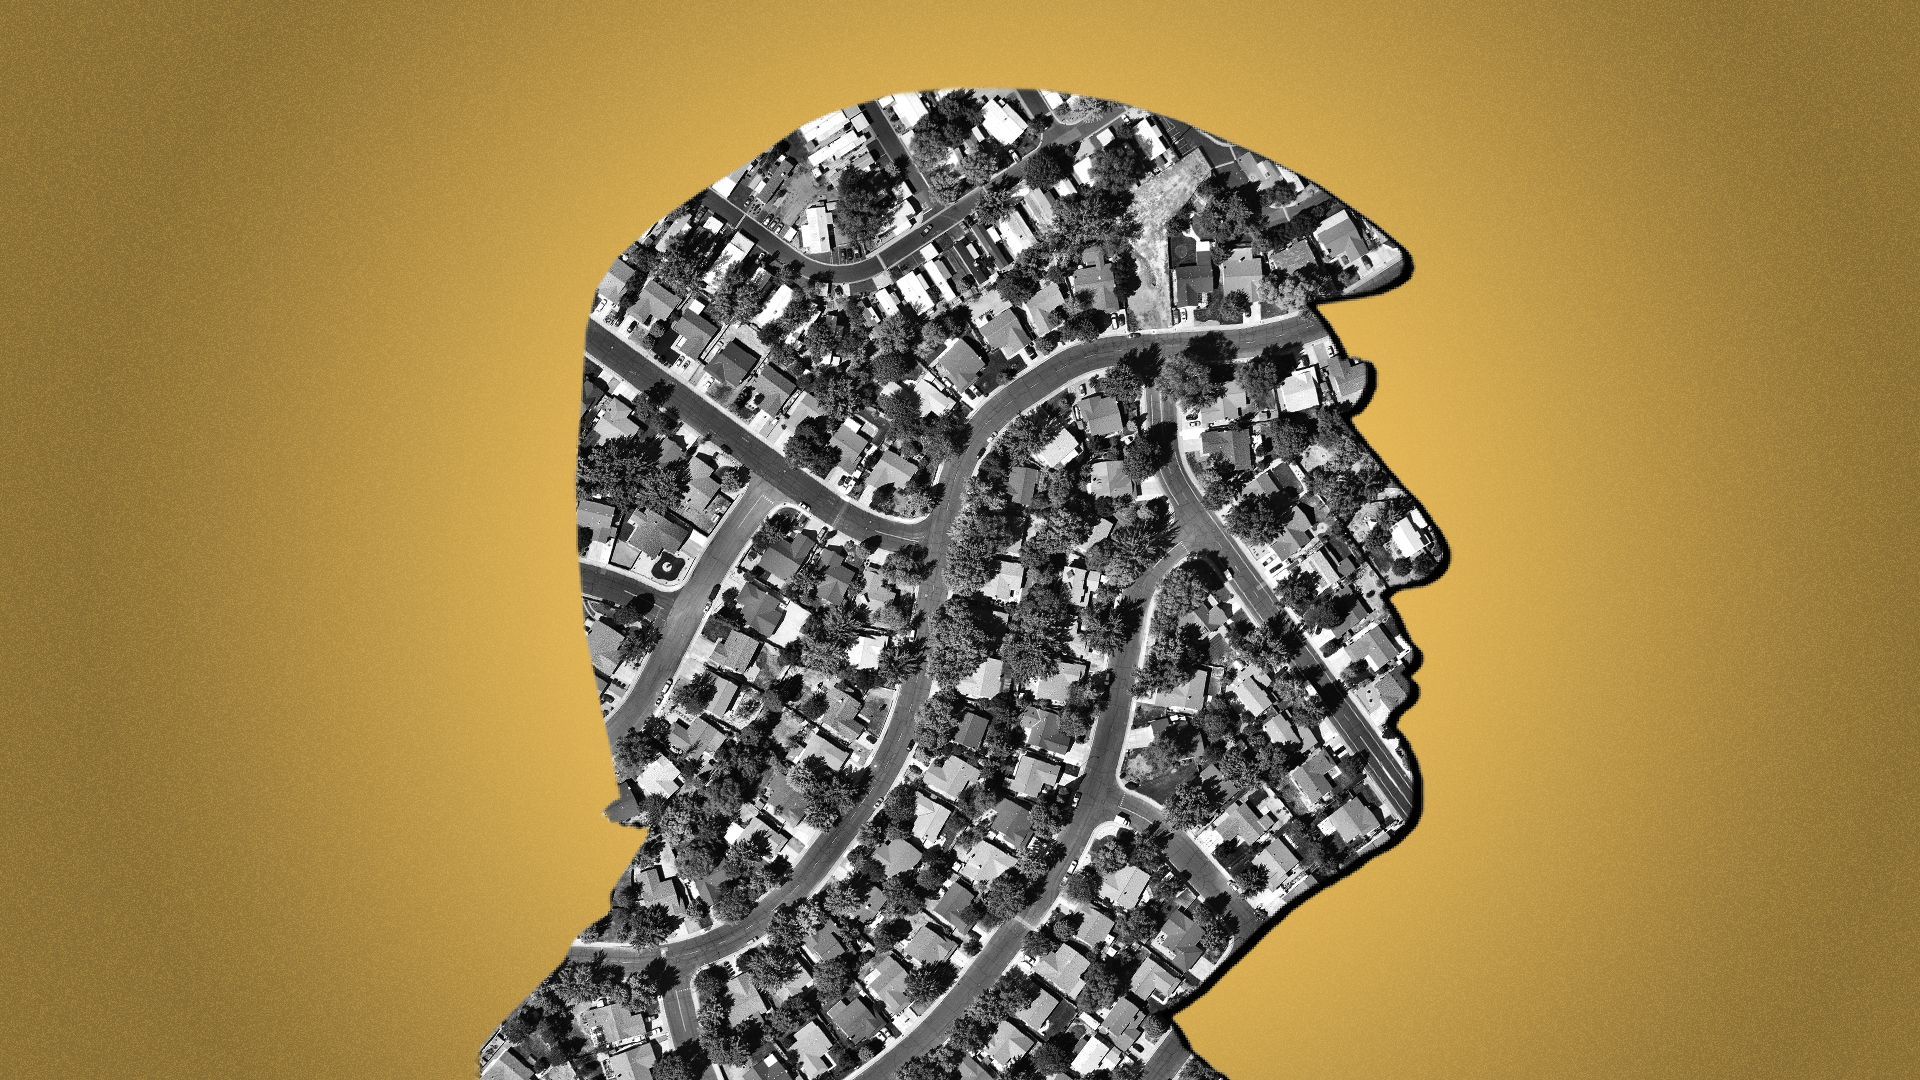 Illustration of the silhouette of Donald Trump made from a birds eye view of a suburban neighborhood